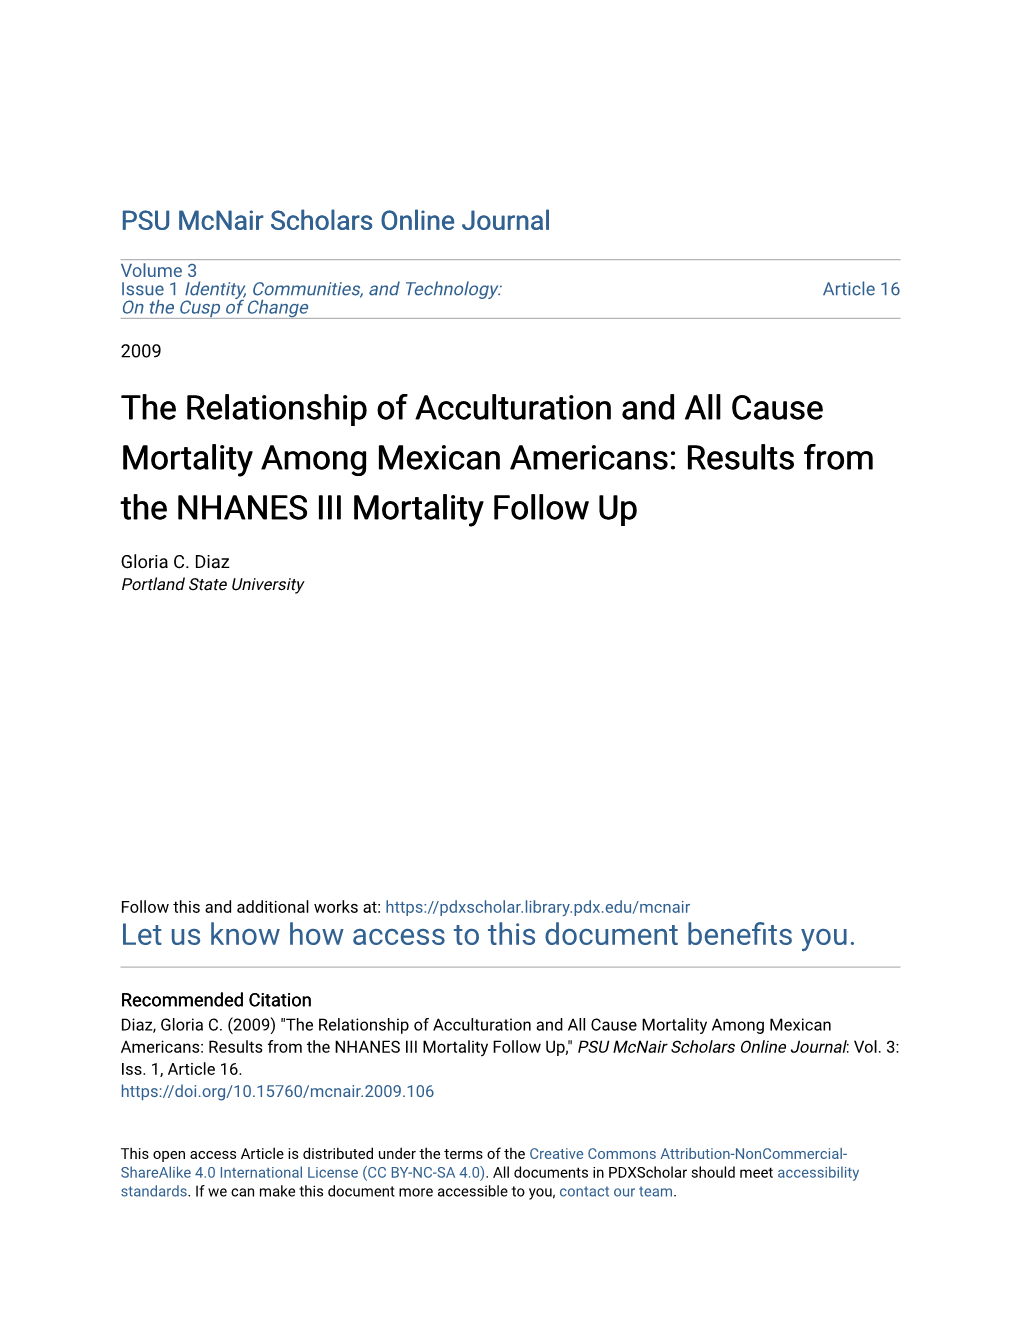 The Relationship of Acculturation and All Cause Mortality Among Mexican Americans: Results from the NHANES III Mortality Follow Up